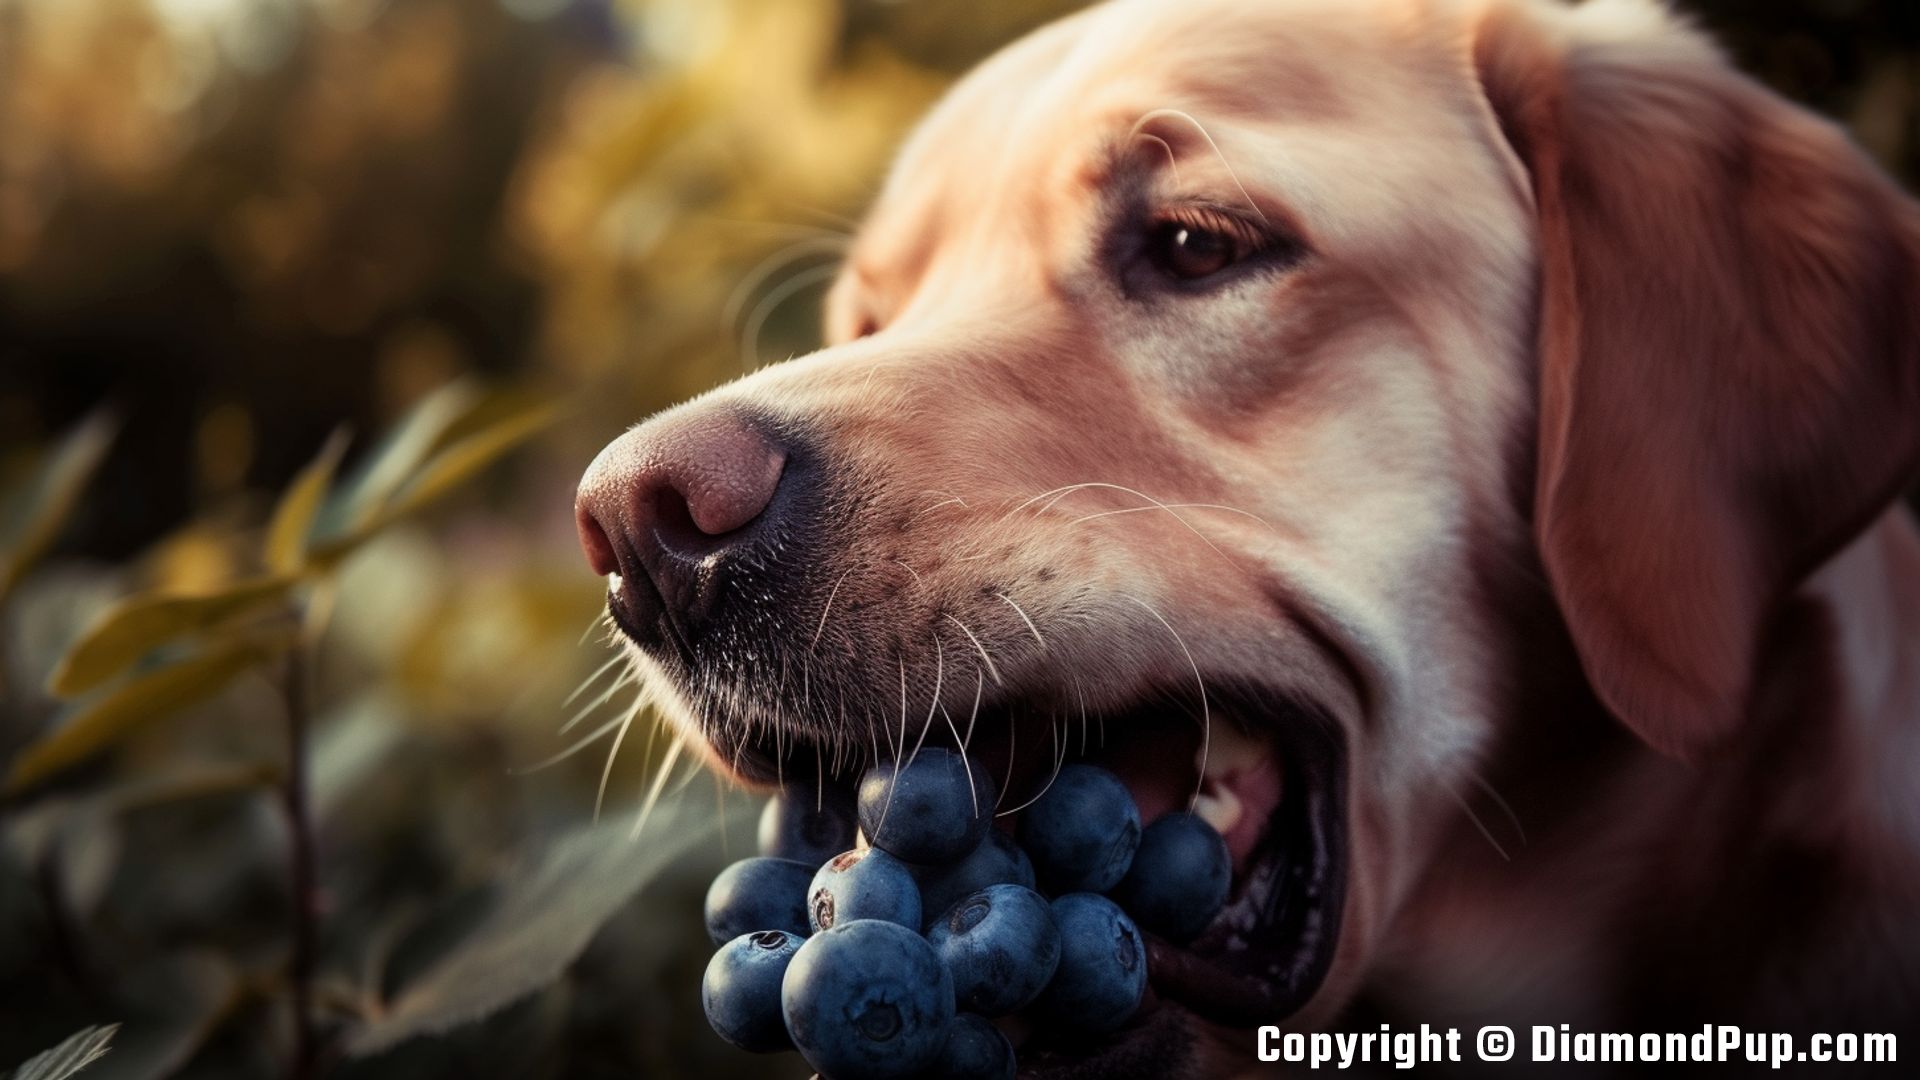 Photograph of a Playful Labrador Eating Blueberries